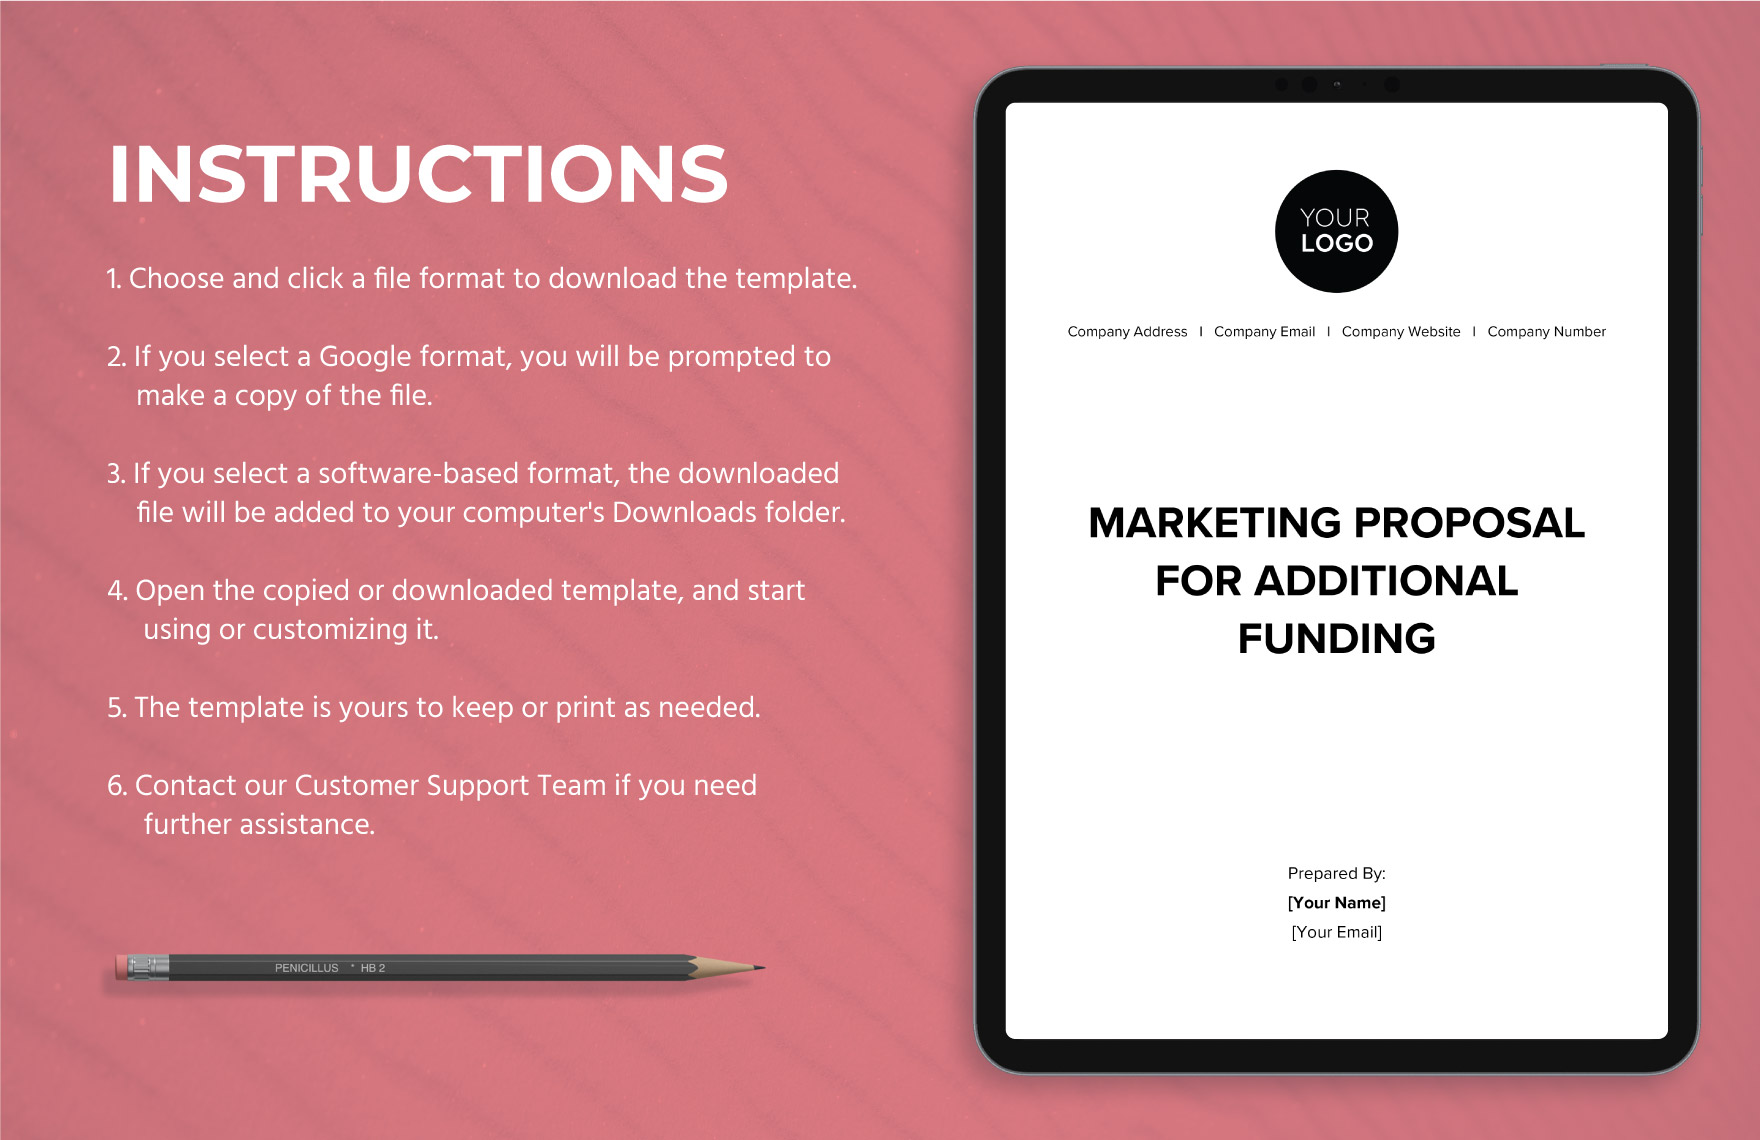 Marketing Proposal for Additional Funding Template